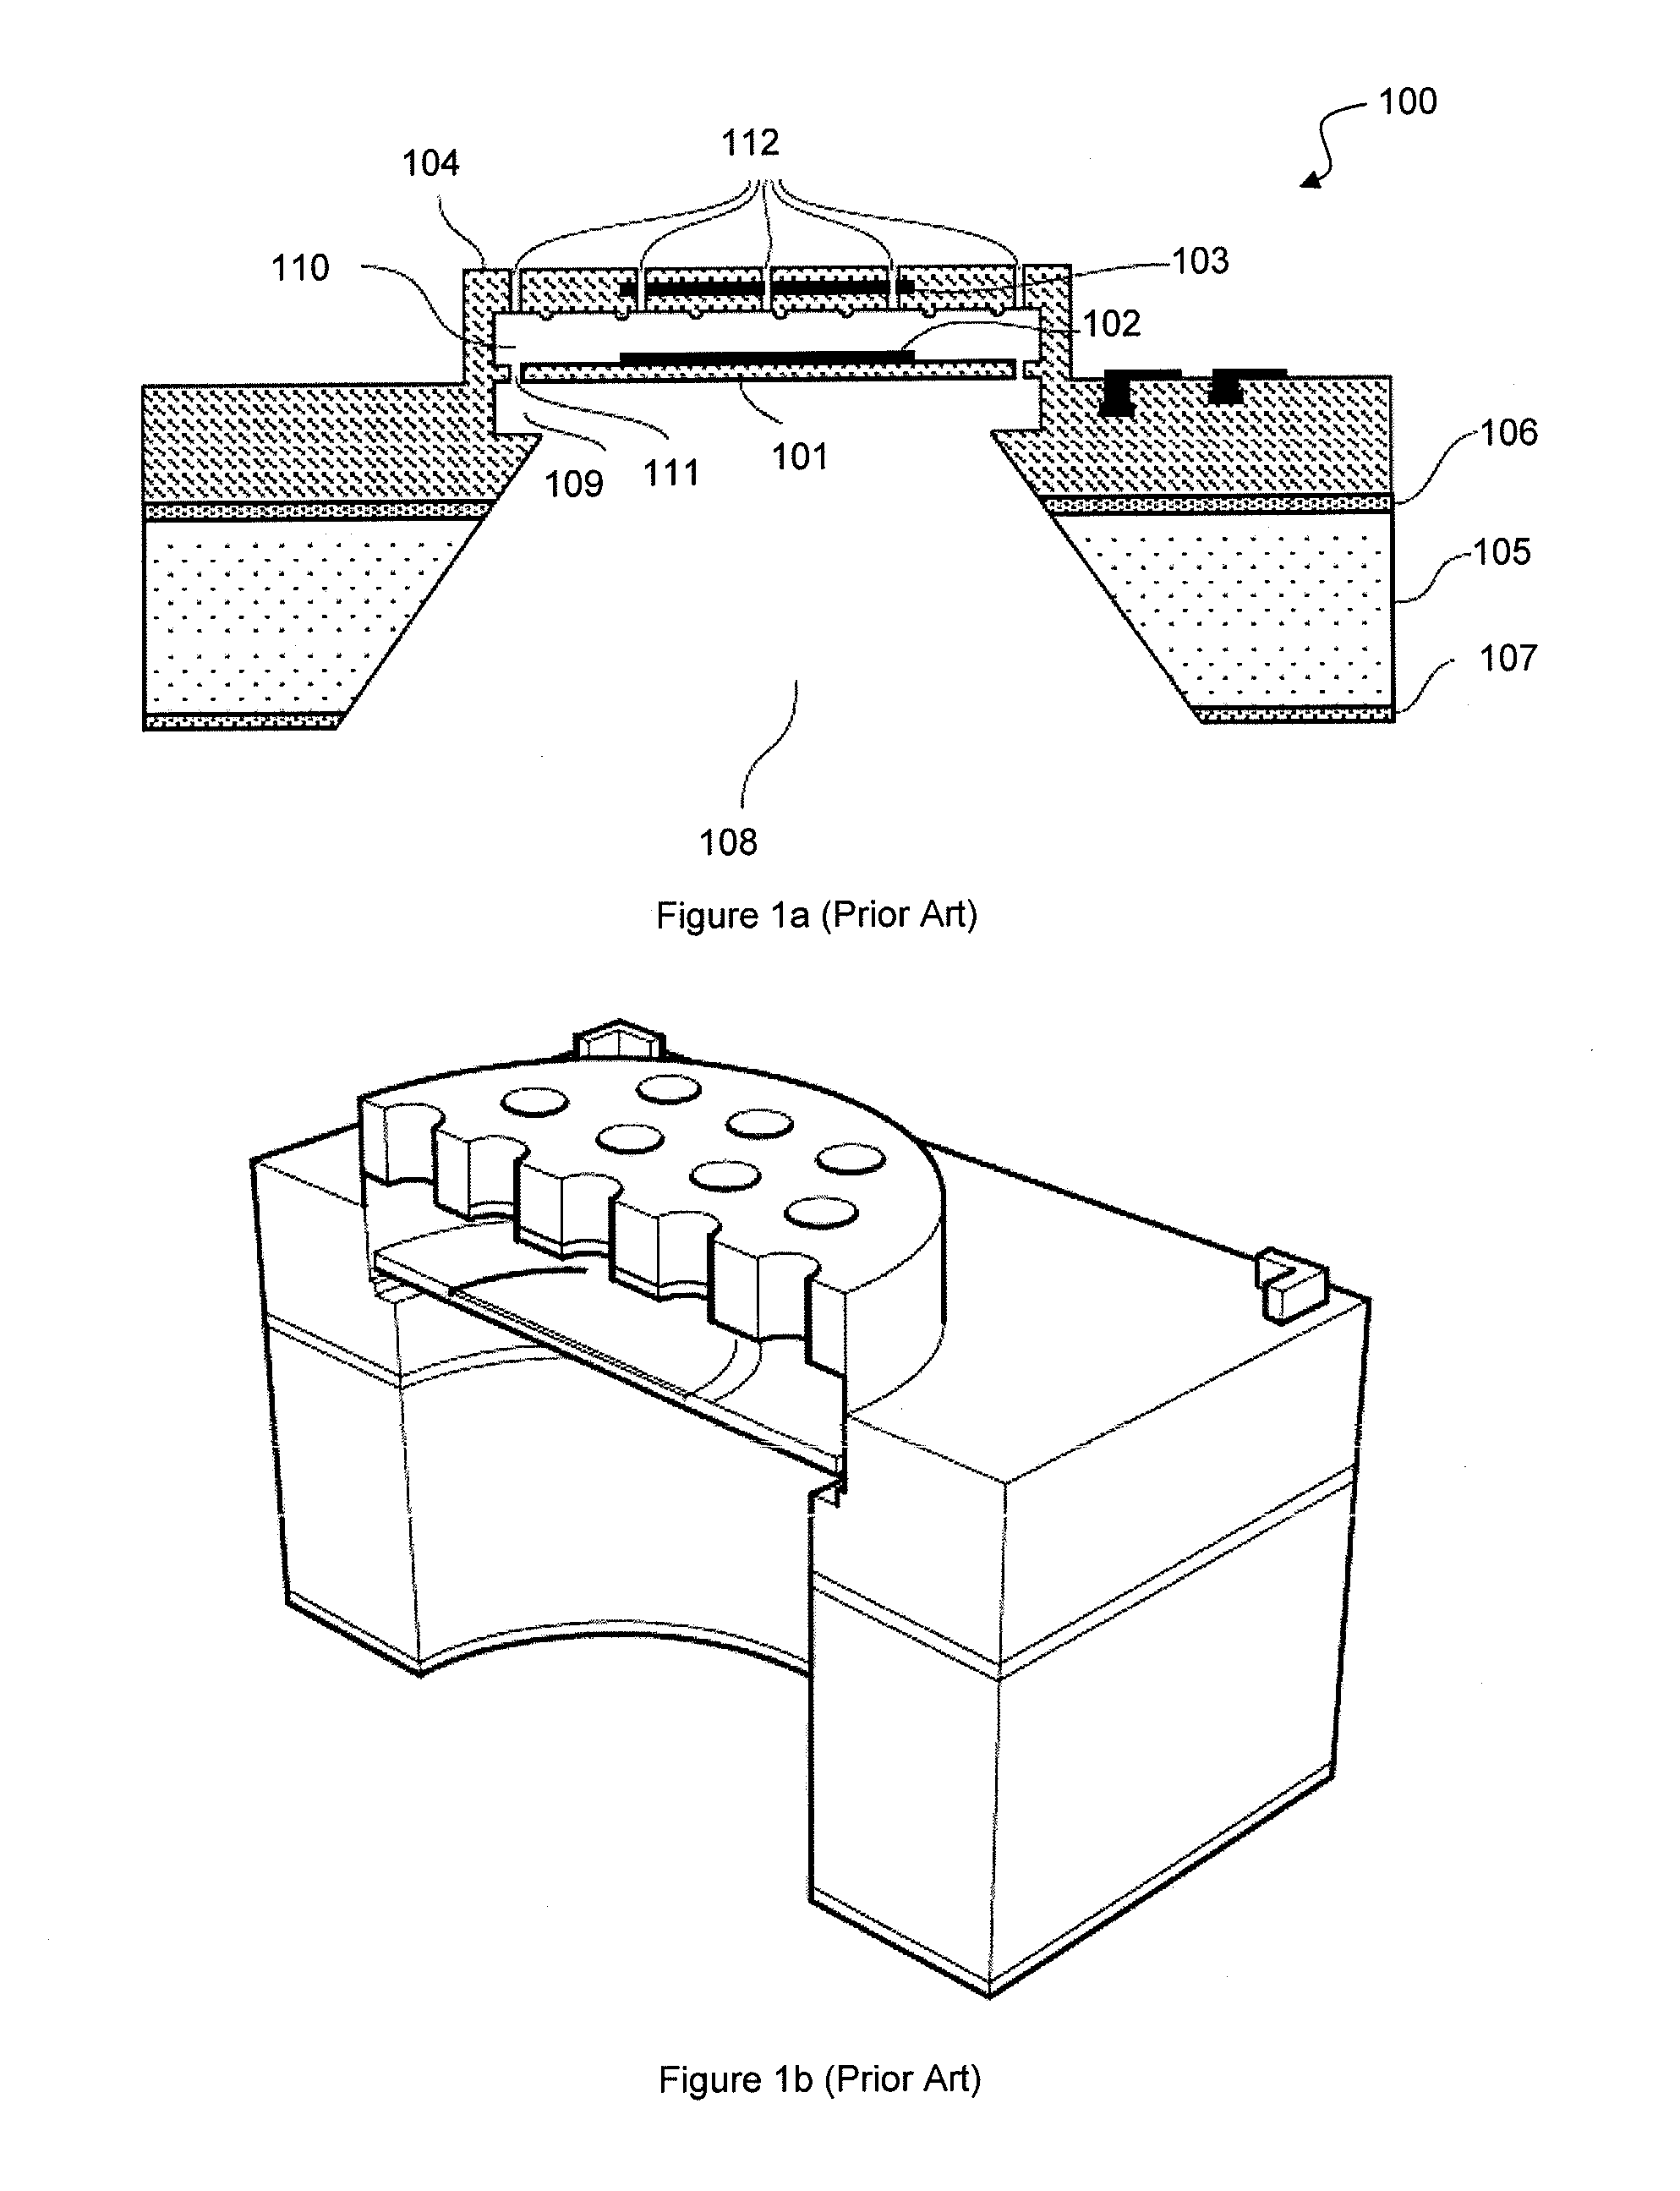 MEMS device and process